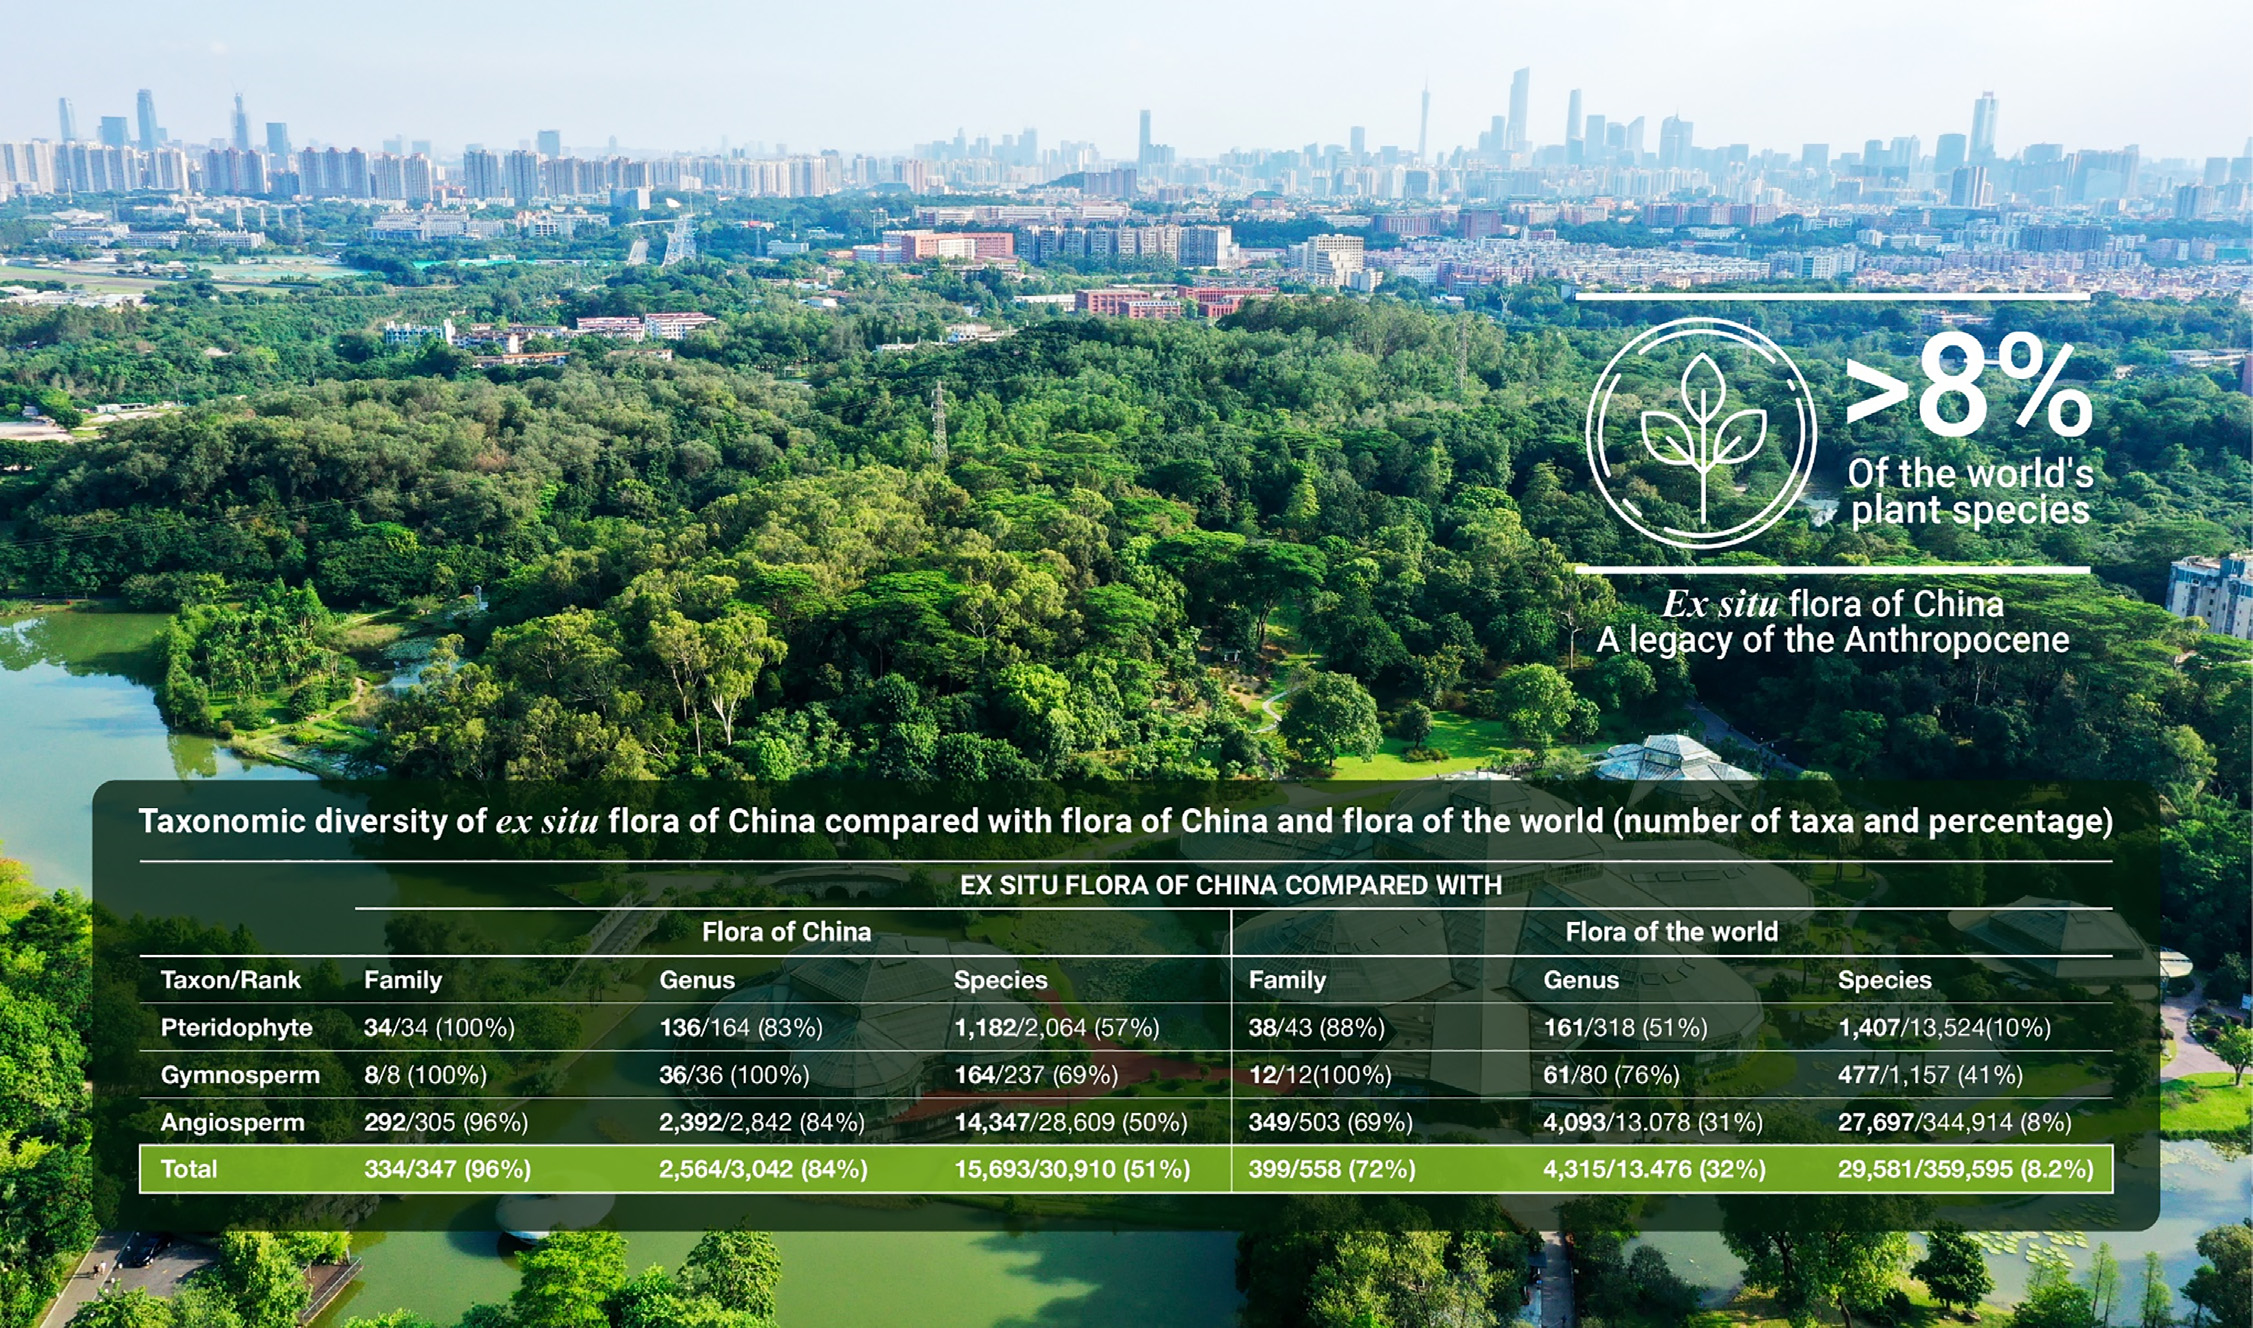 China: The role of botanical gardens in conservation